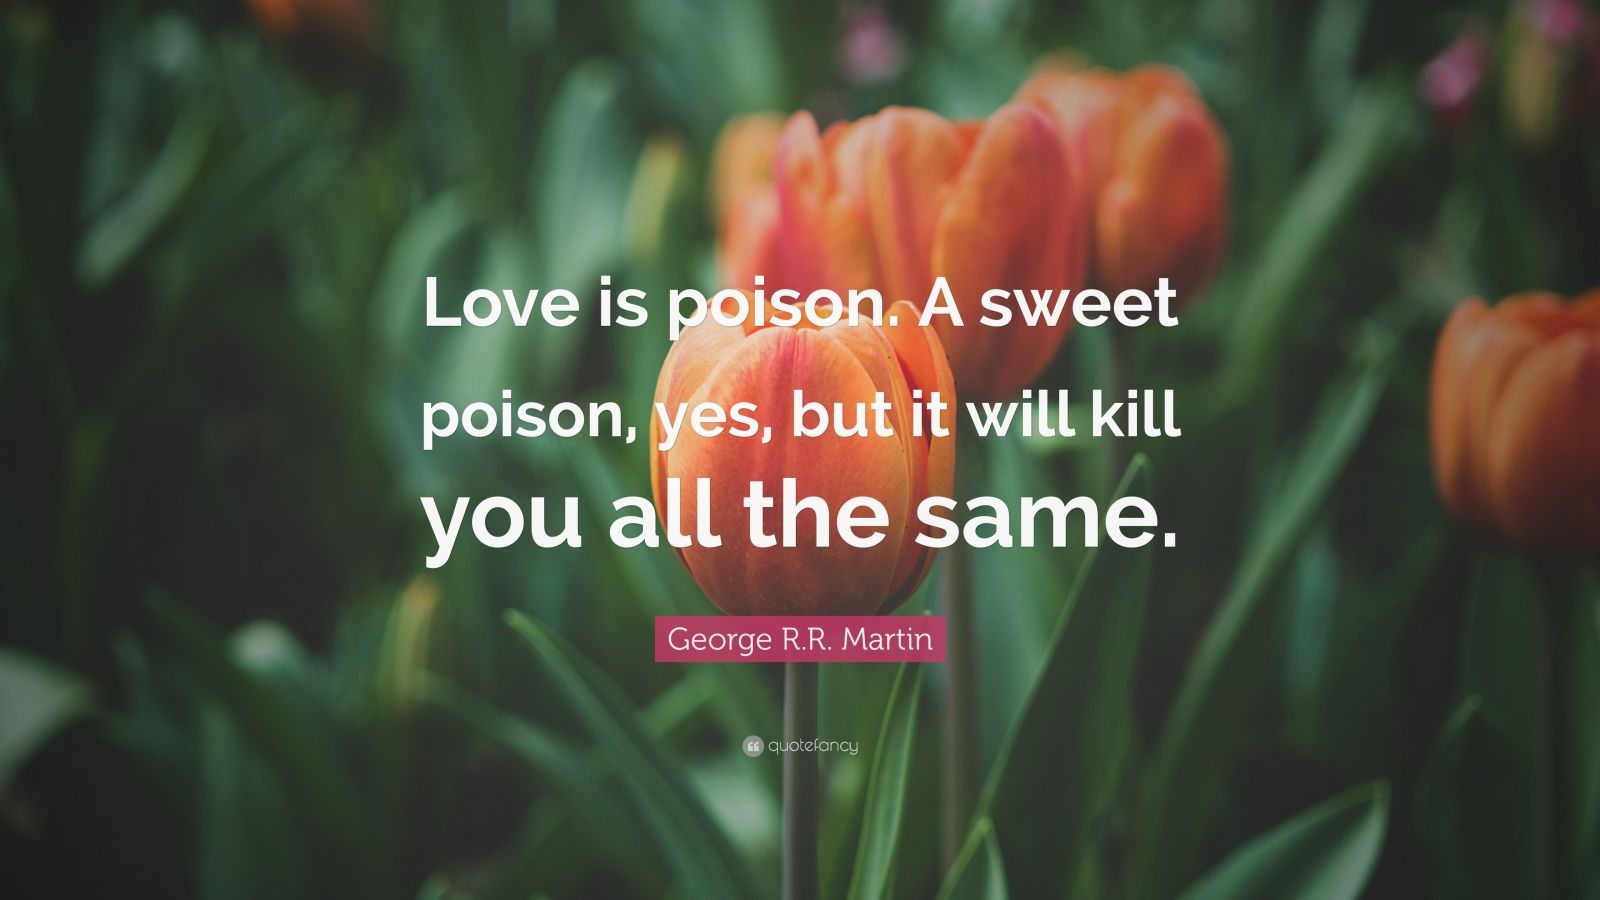 George . Martin Quote: “Love is poison. A sweet poison, yes, but it will  kill you all the same.”